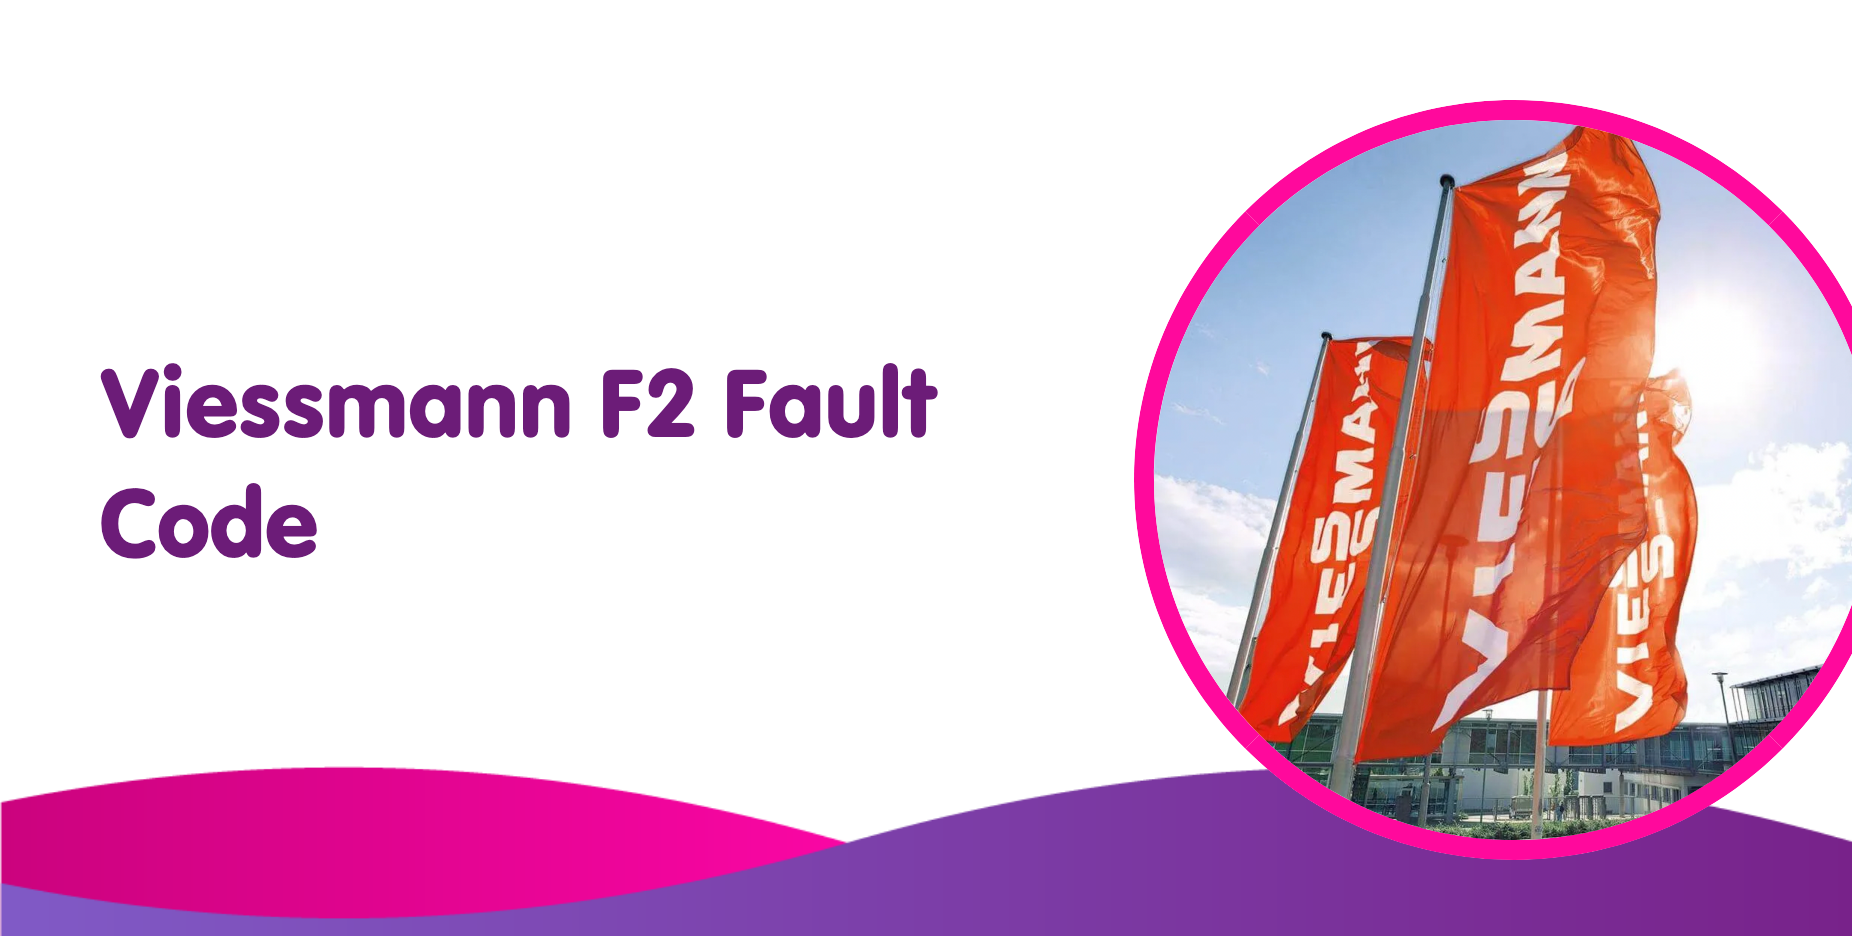 Viessmann F2 Fault Code Meaning, Causes & How to Fix